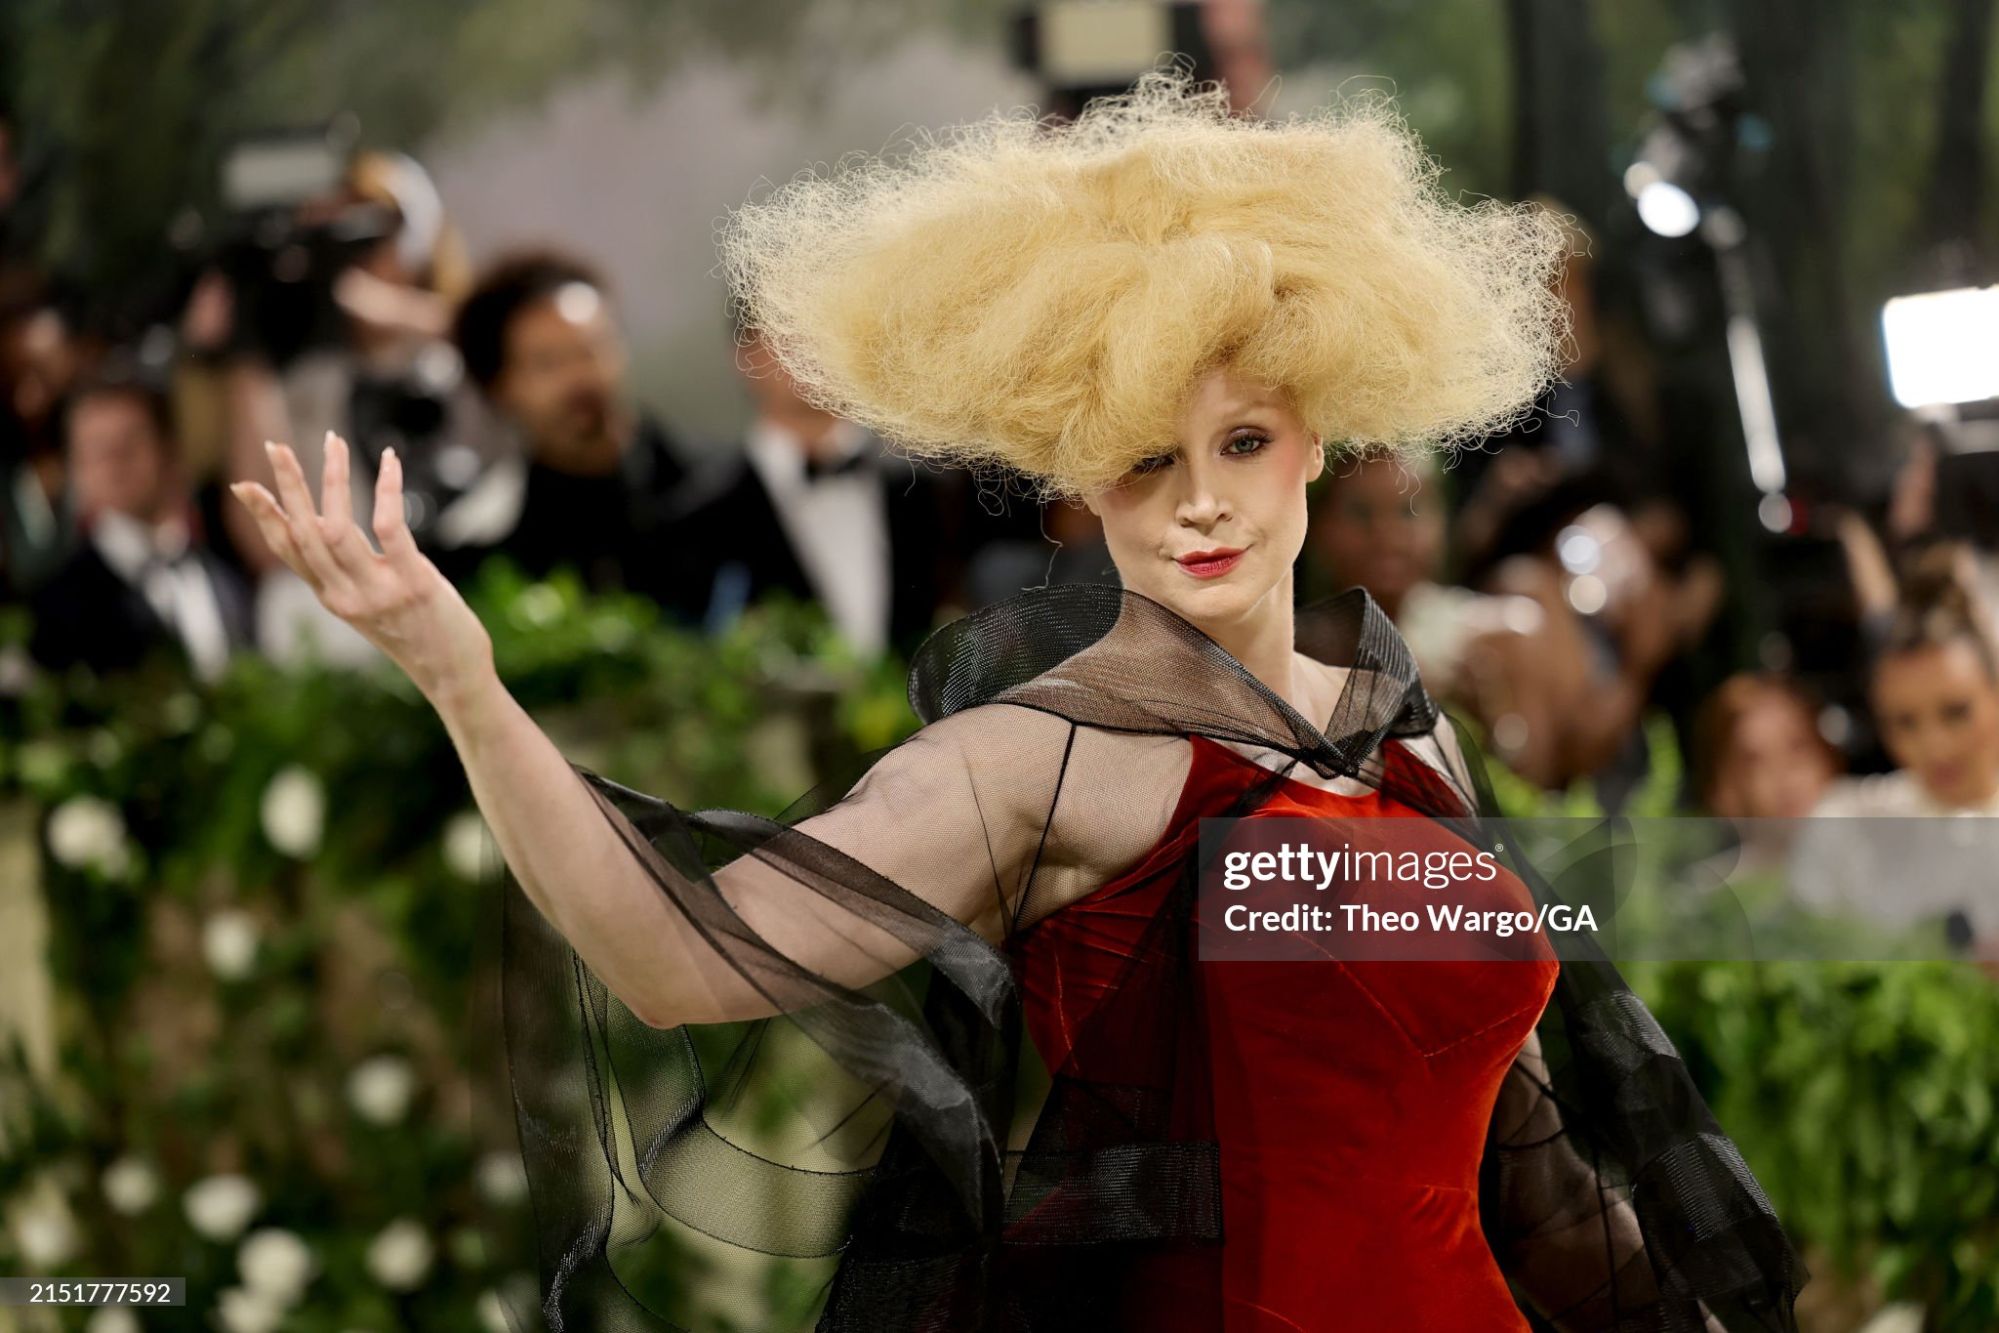 gettyimages-2151777592-2048x2048.jpg